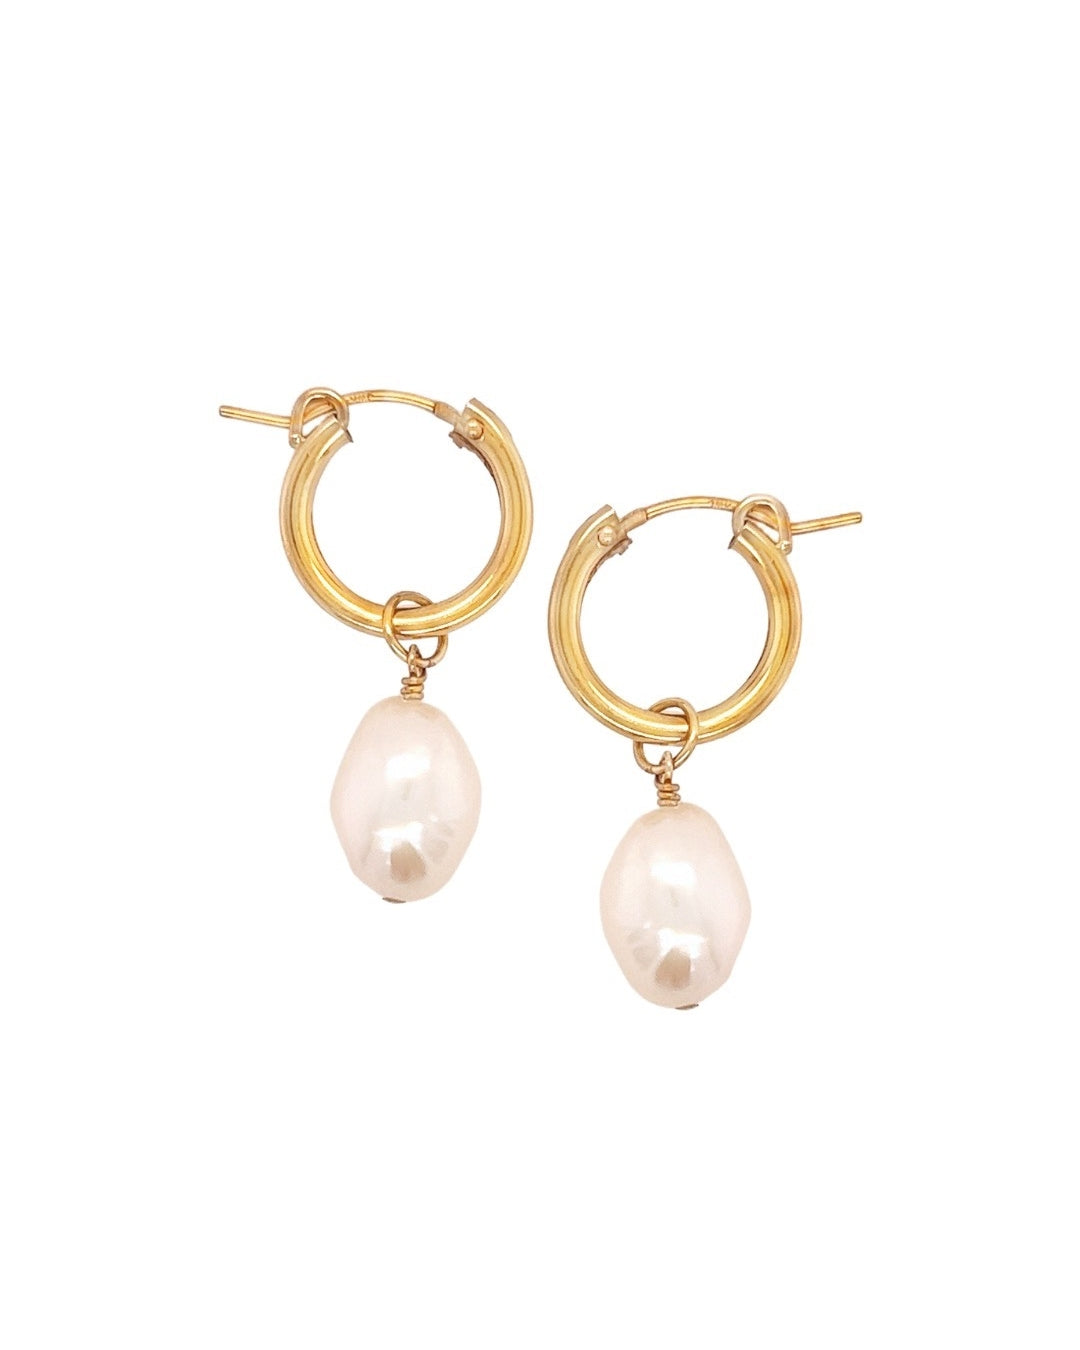 Gold freshwater pearl earring charm on gold fill hoops 